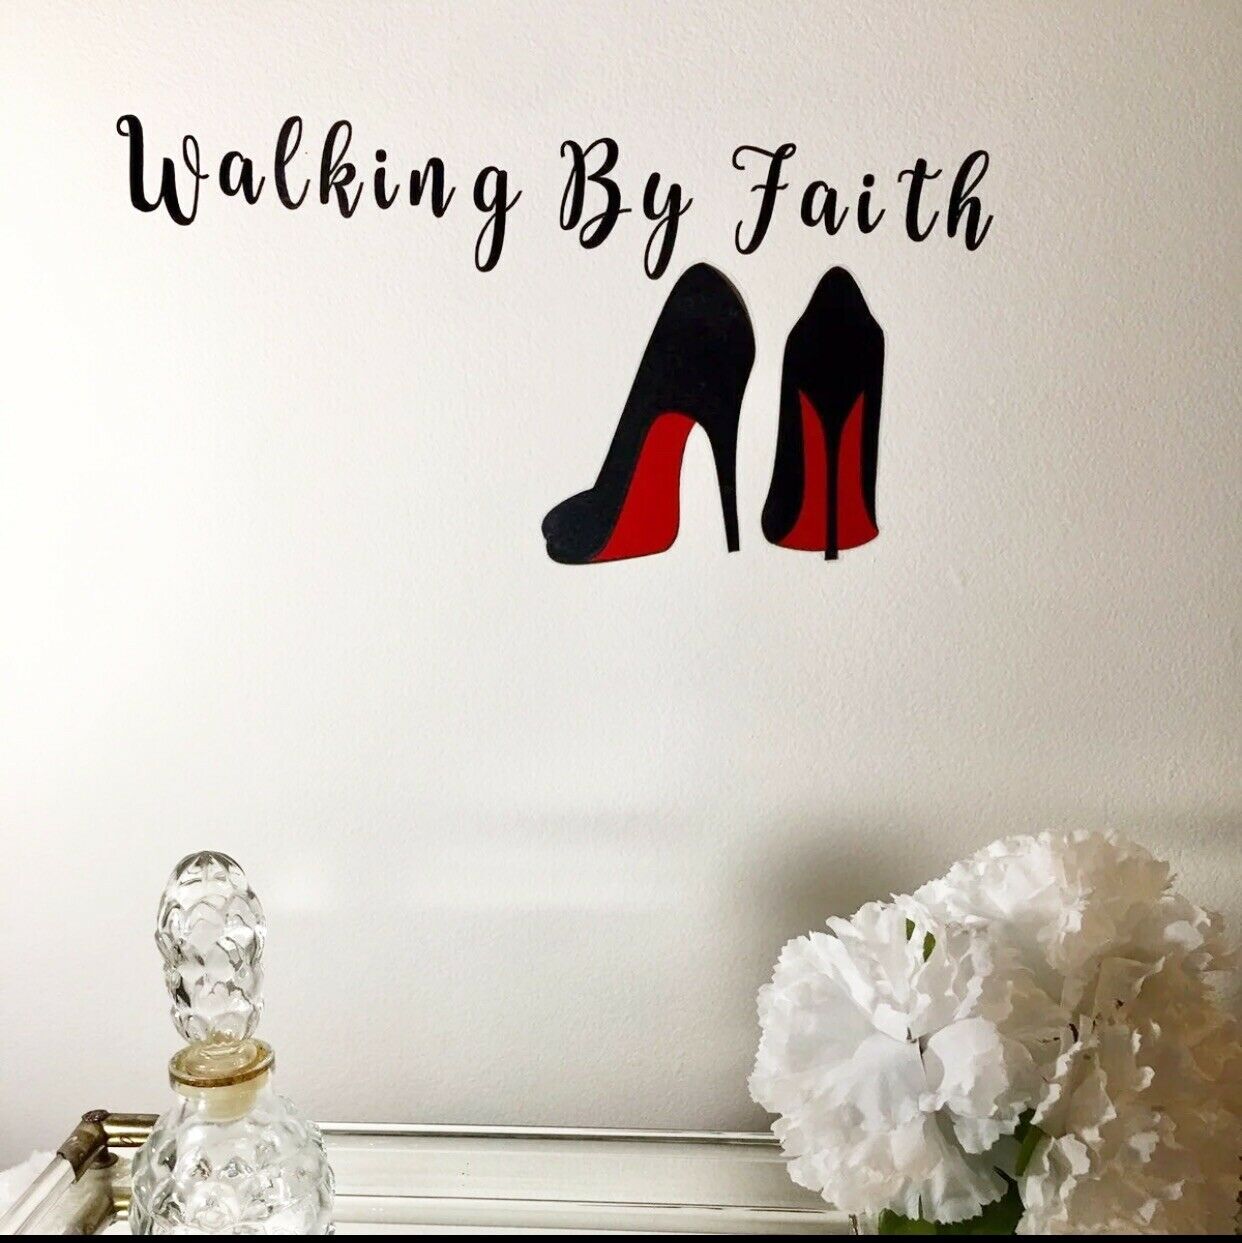 Walking By Faith Word Decal Red Shoes Decal Wall Decal Sticker Black Friday Sale